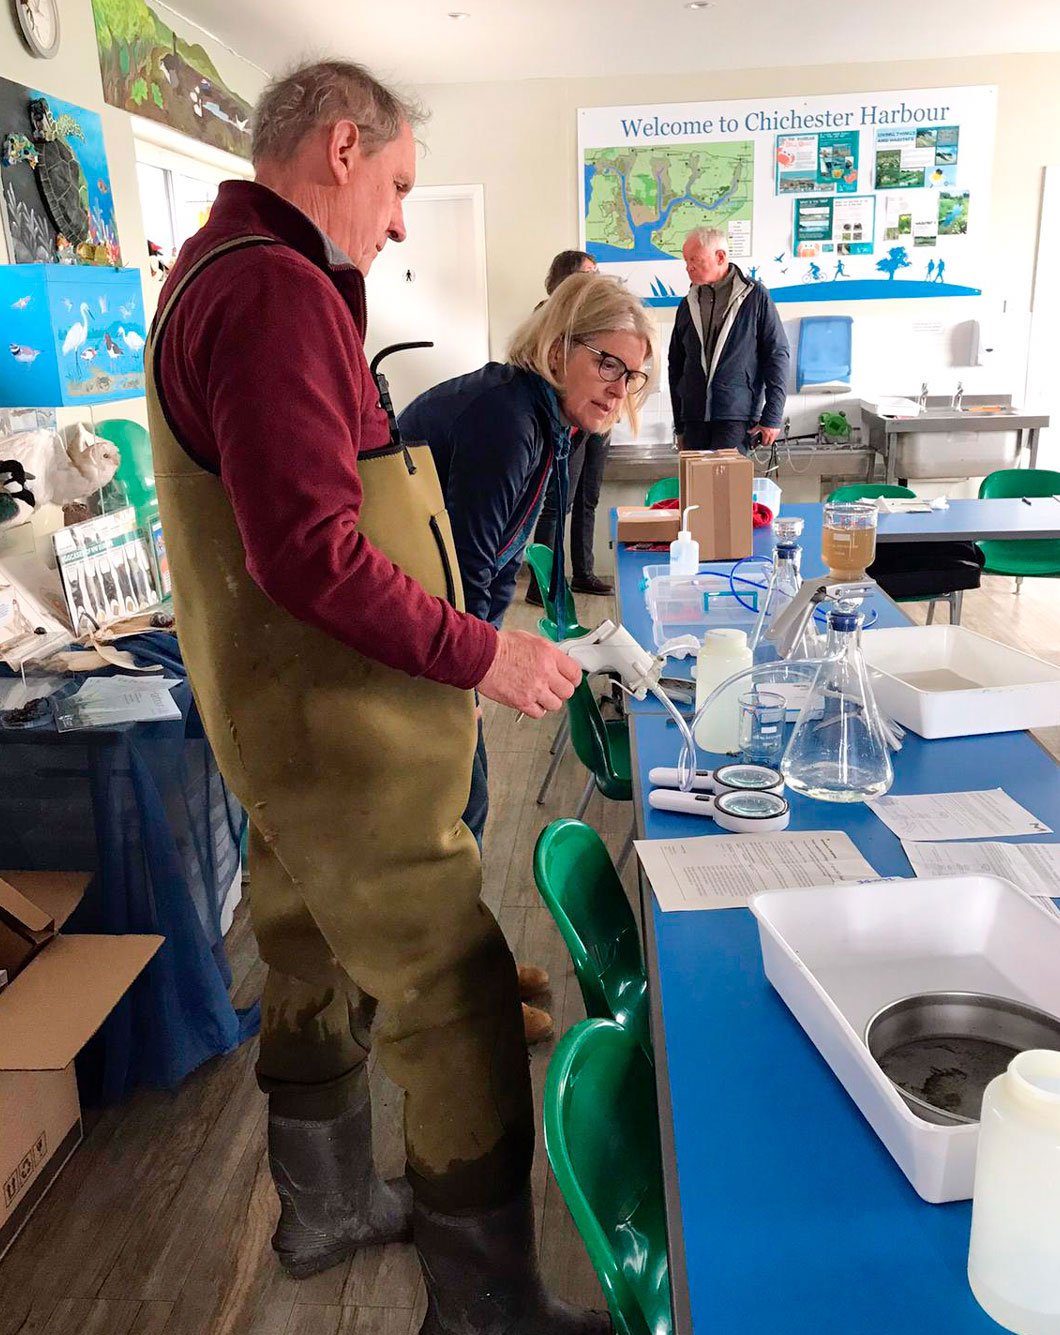 Two people stand at a table with beakers and other equipment. One person is wearing hip waders.